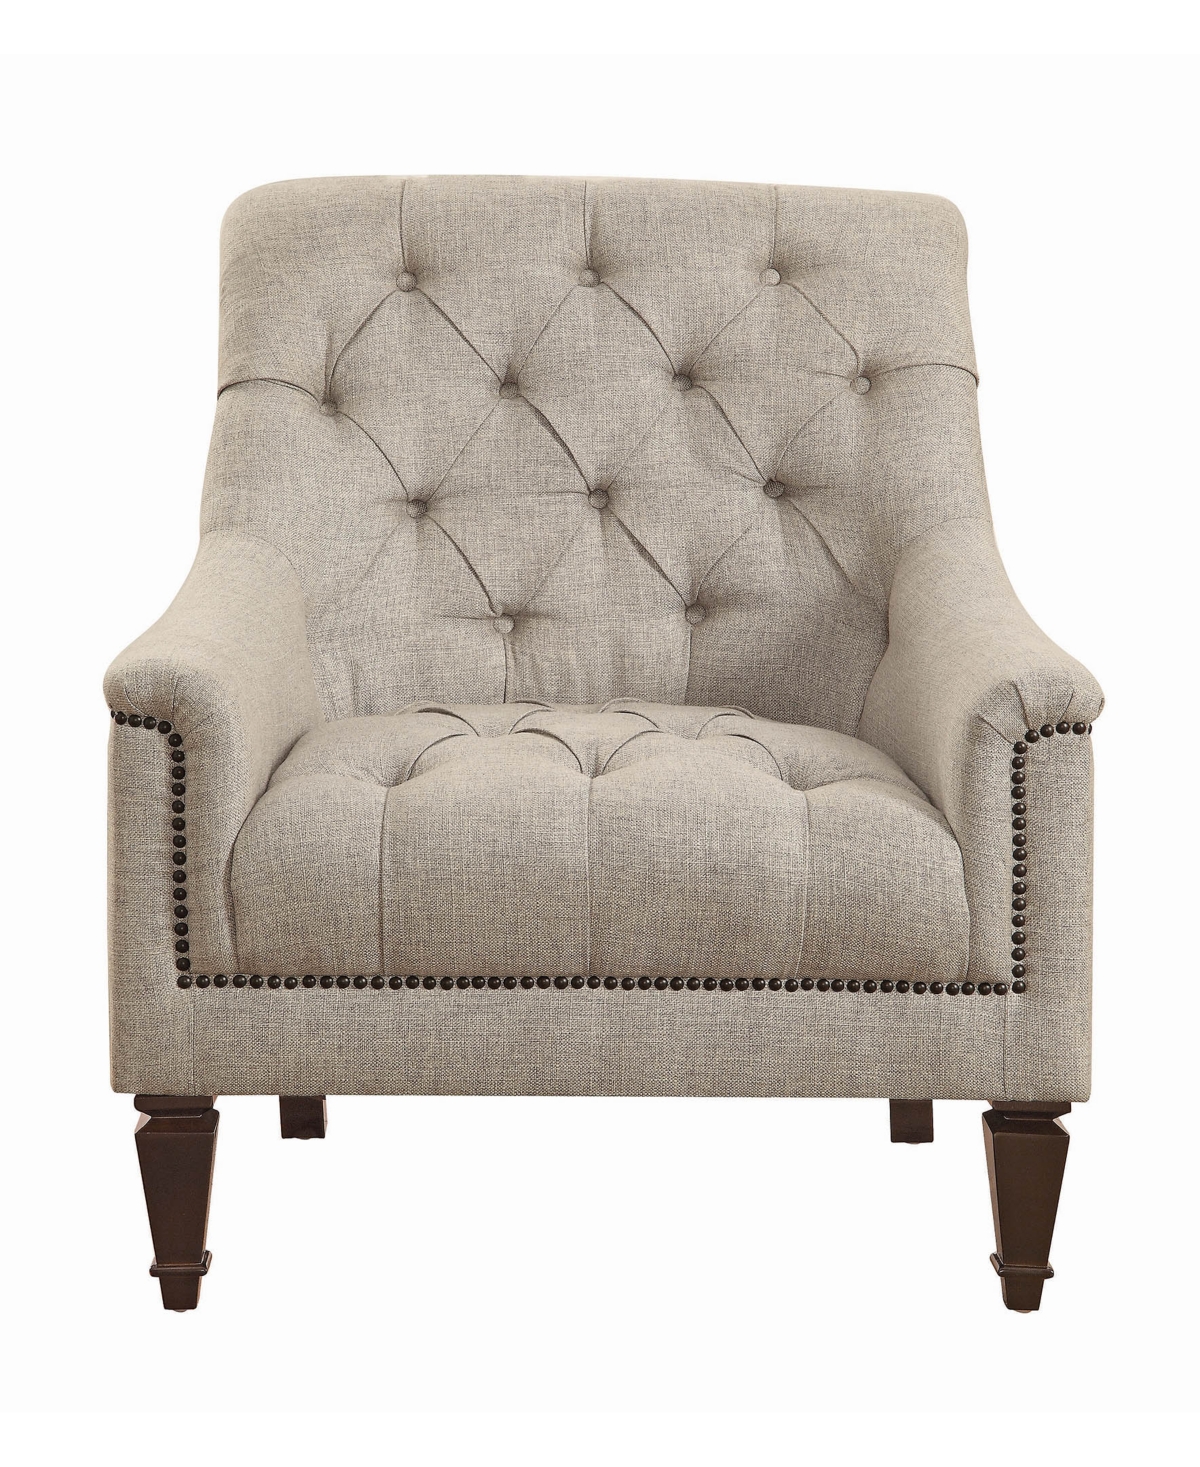 Coaster Home Furnishings Avonlea Upholstered Chair with Heavy Tufting